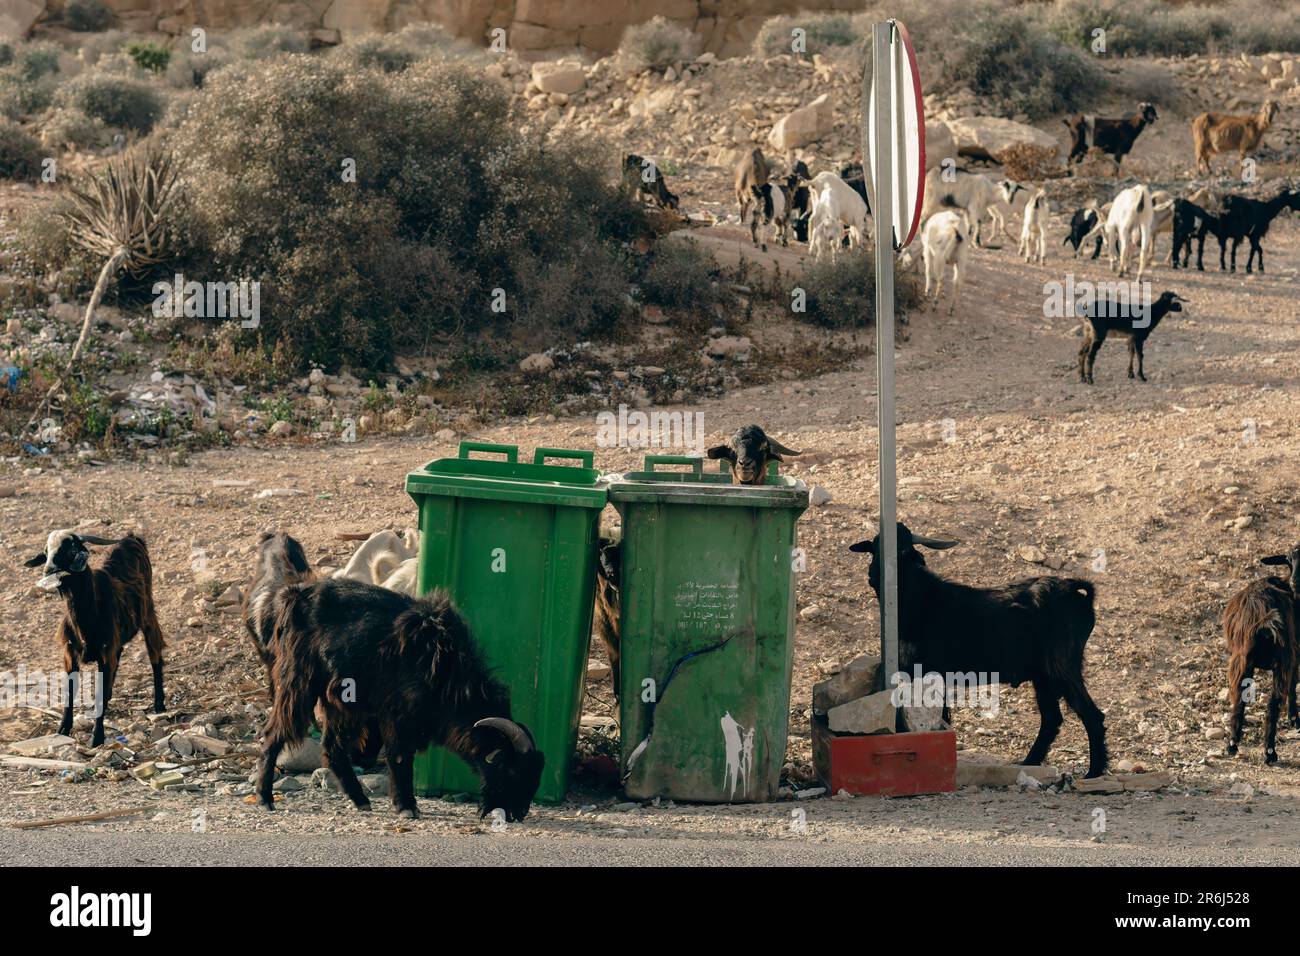 Goats going through rubbish in Taghazout, Morocco Stock Photo